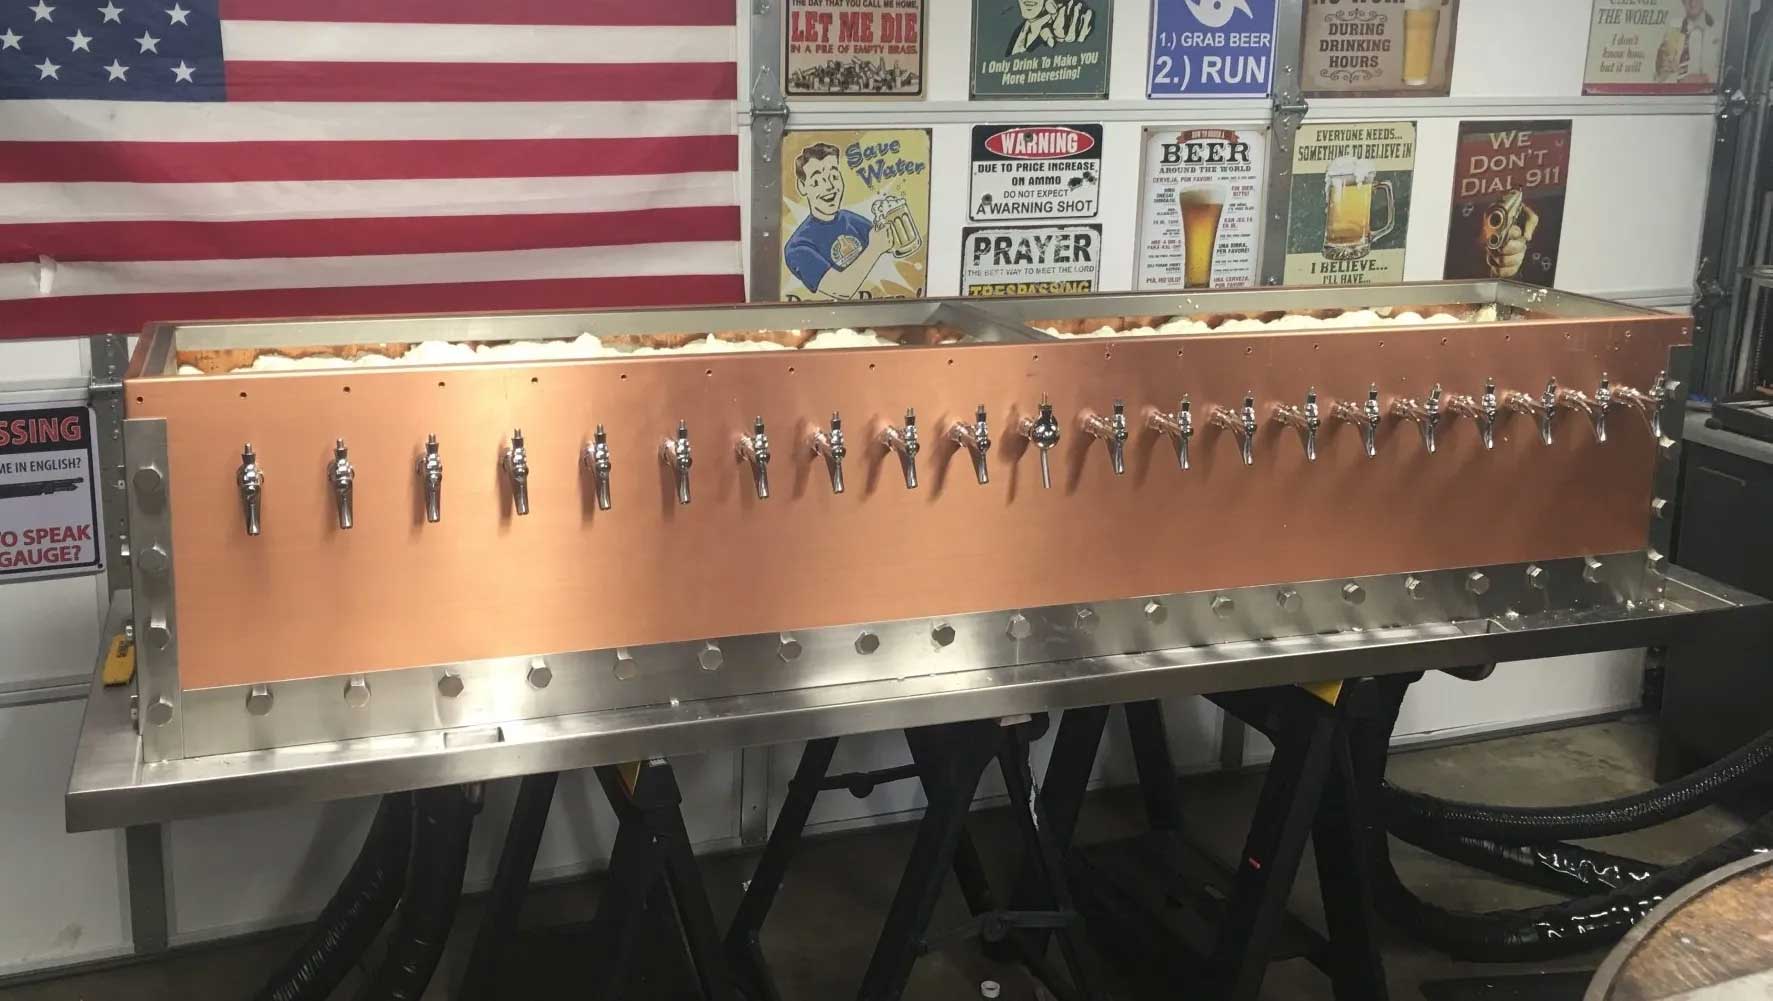 The Beer Faucet